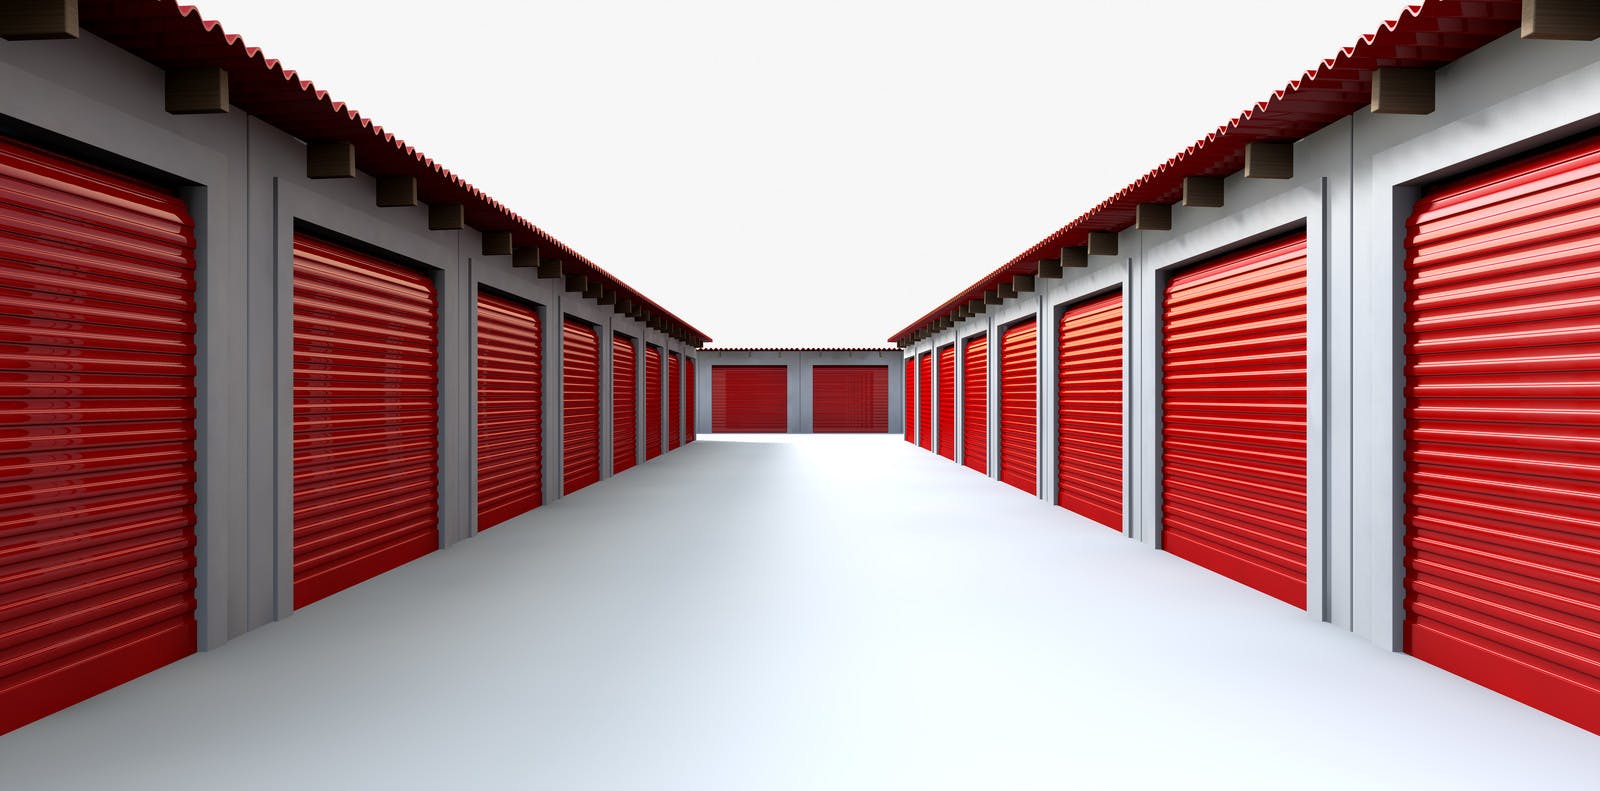 Self Storage Investment: The Weathered Rock of the CRE Industry